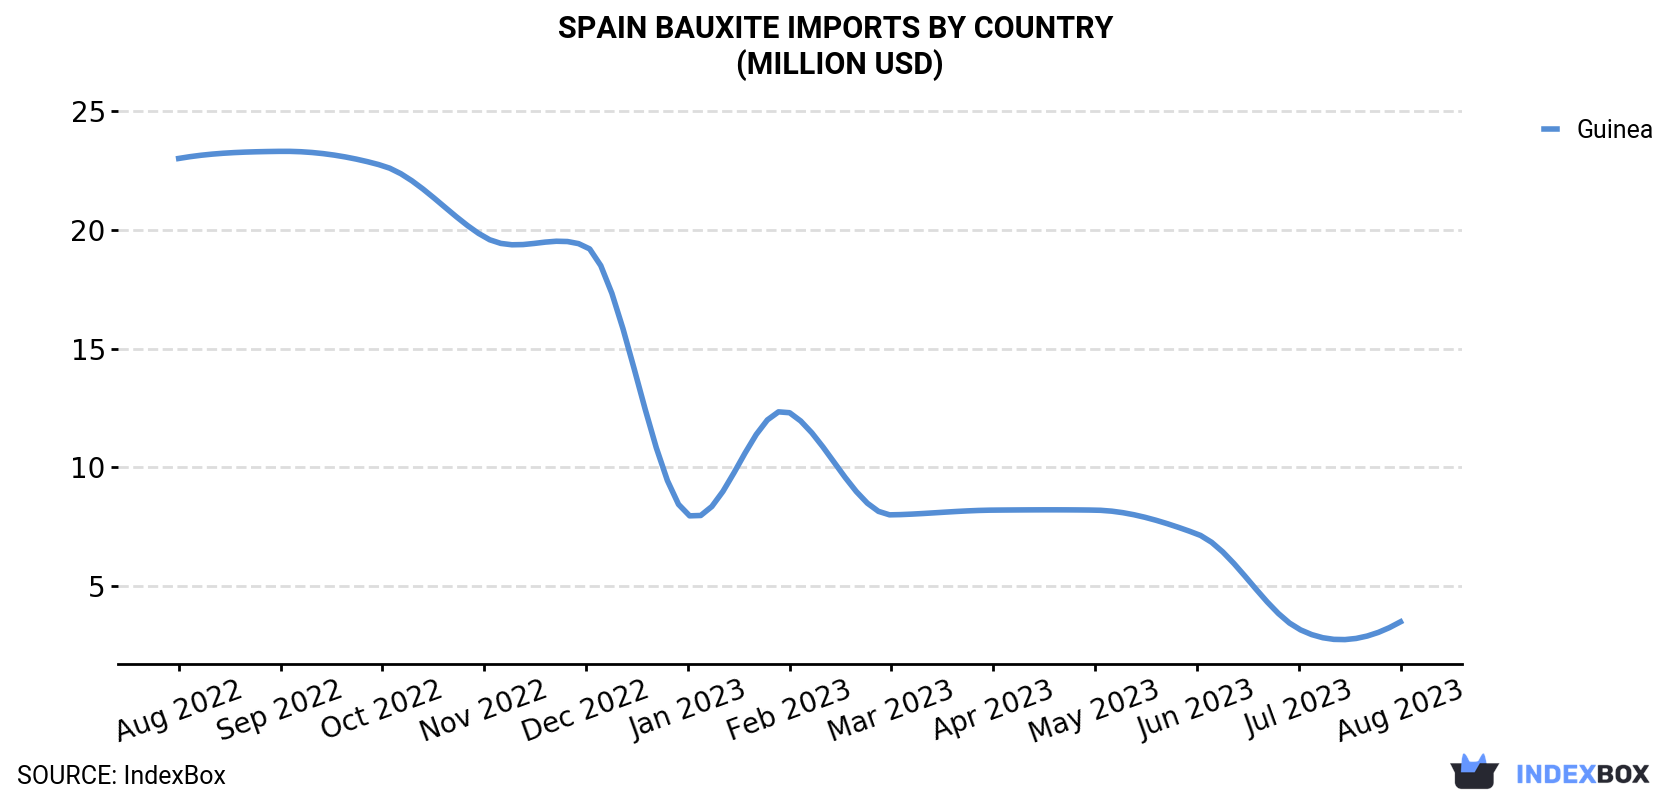 Spain Bauxite Imports By Country (Million USD)